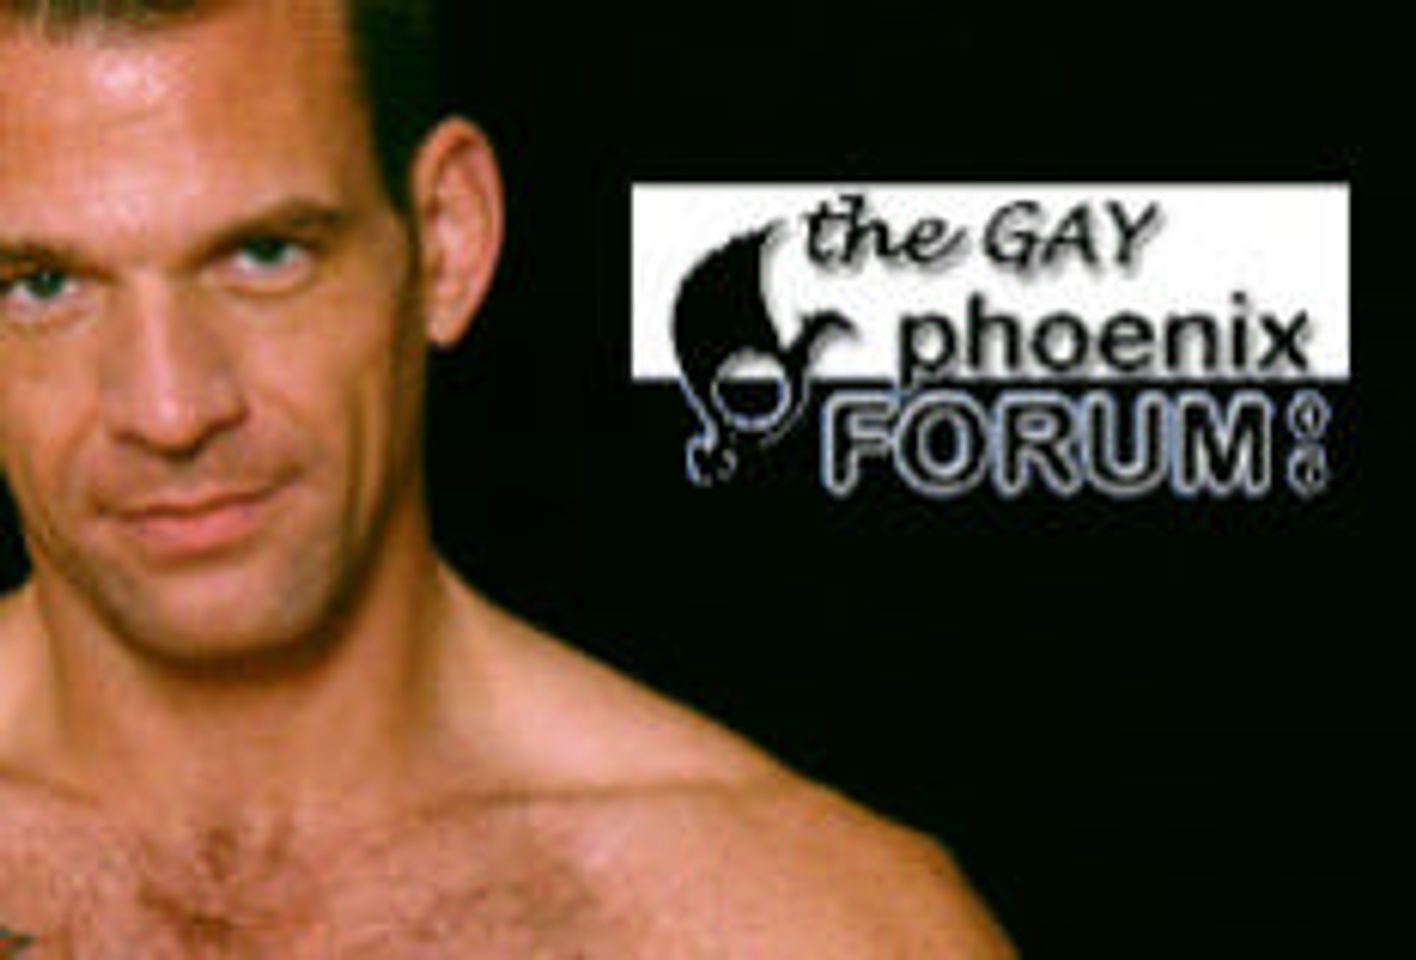 Gay Phoenix Forum Planned for October